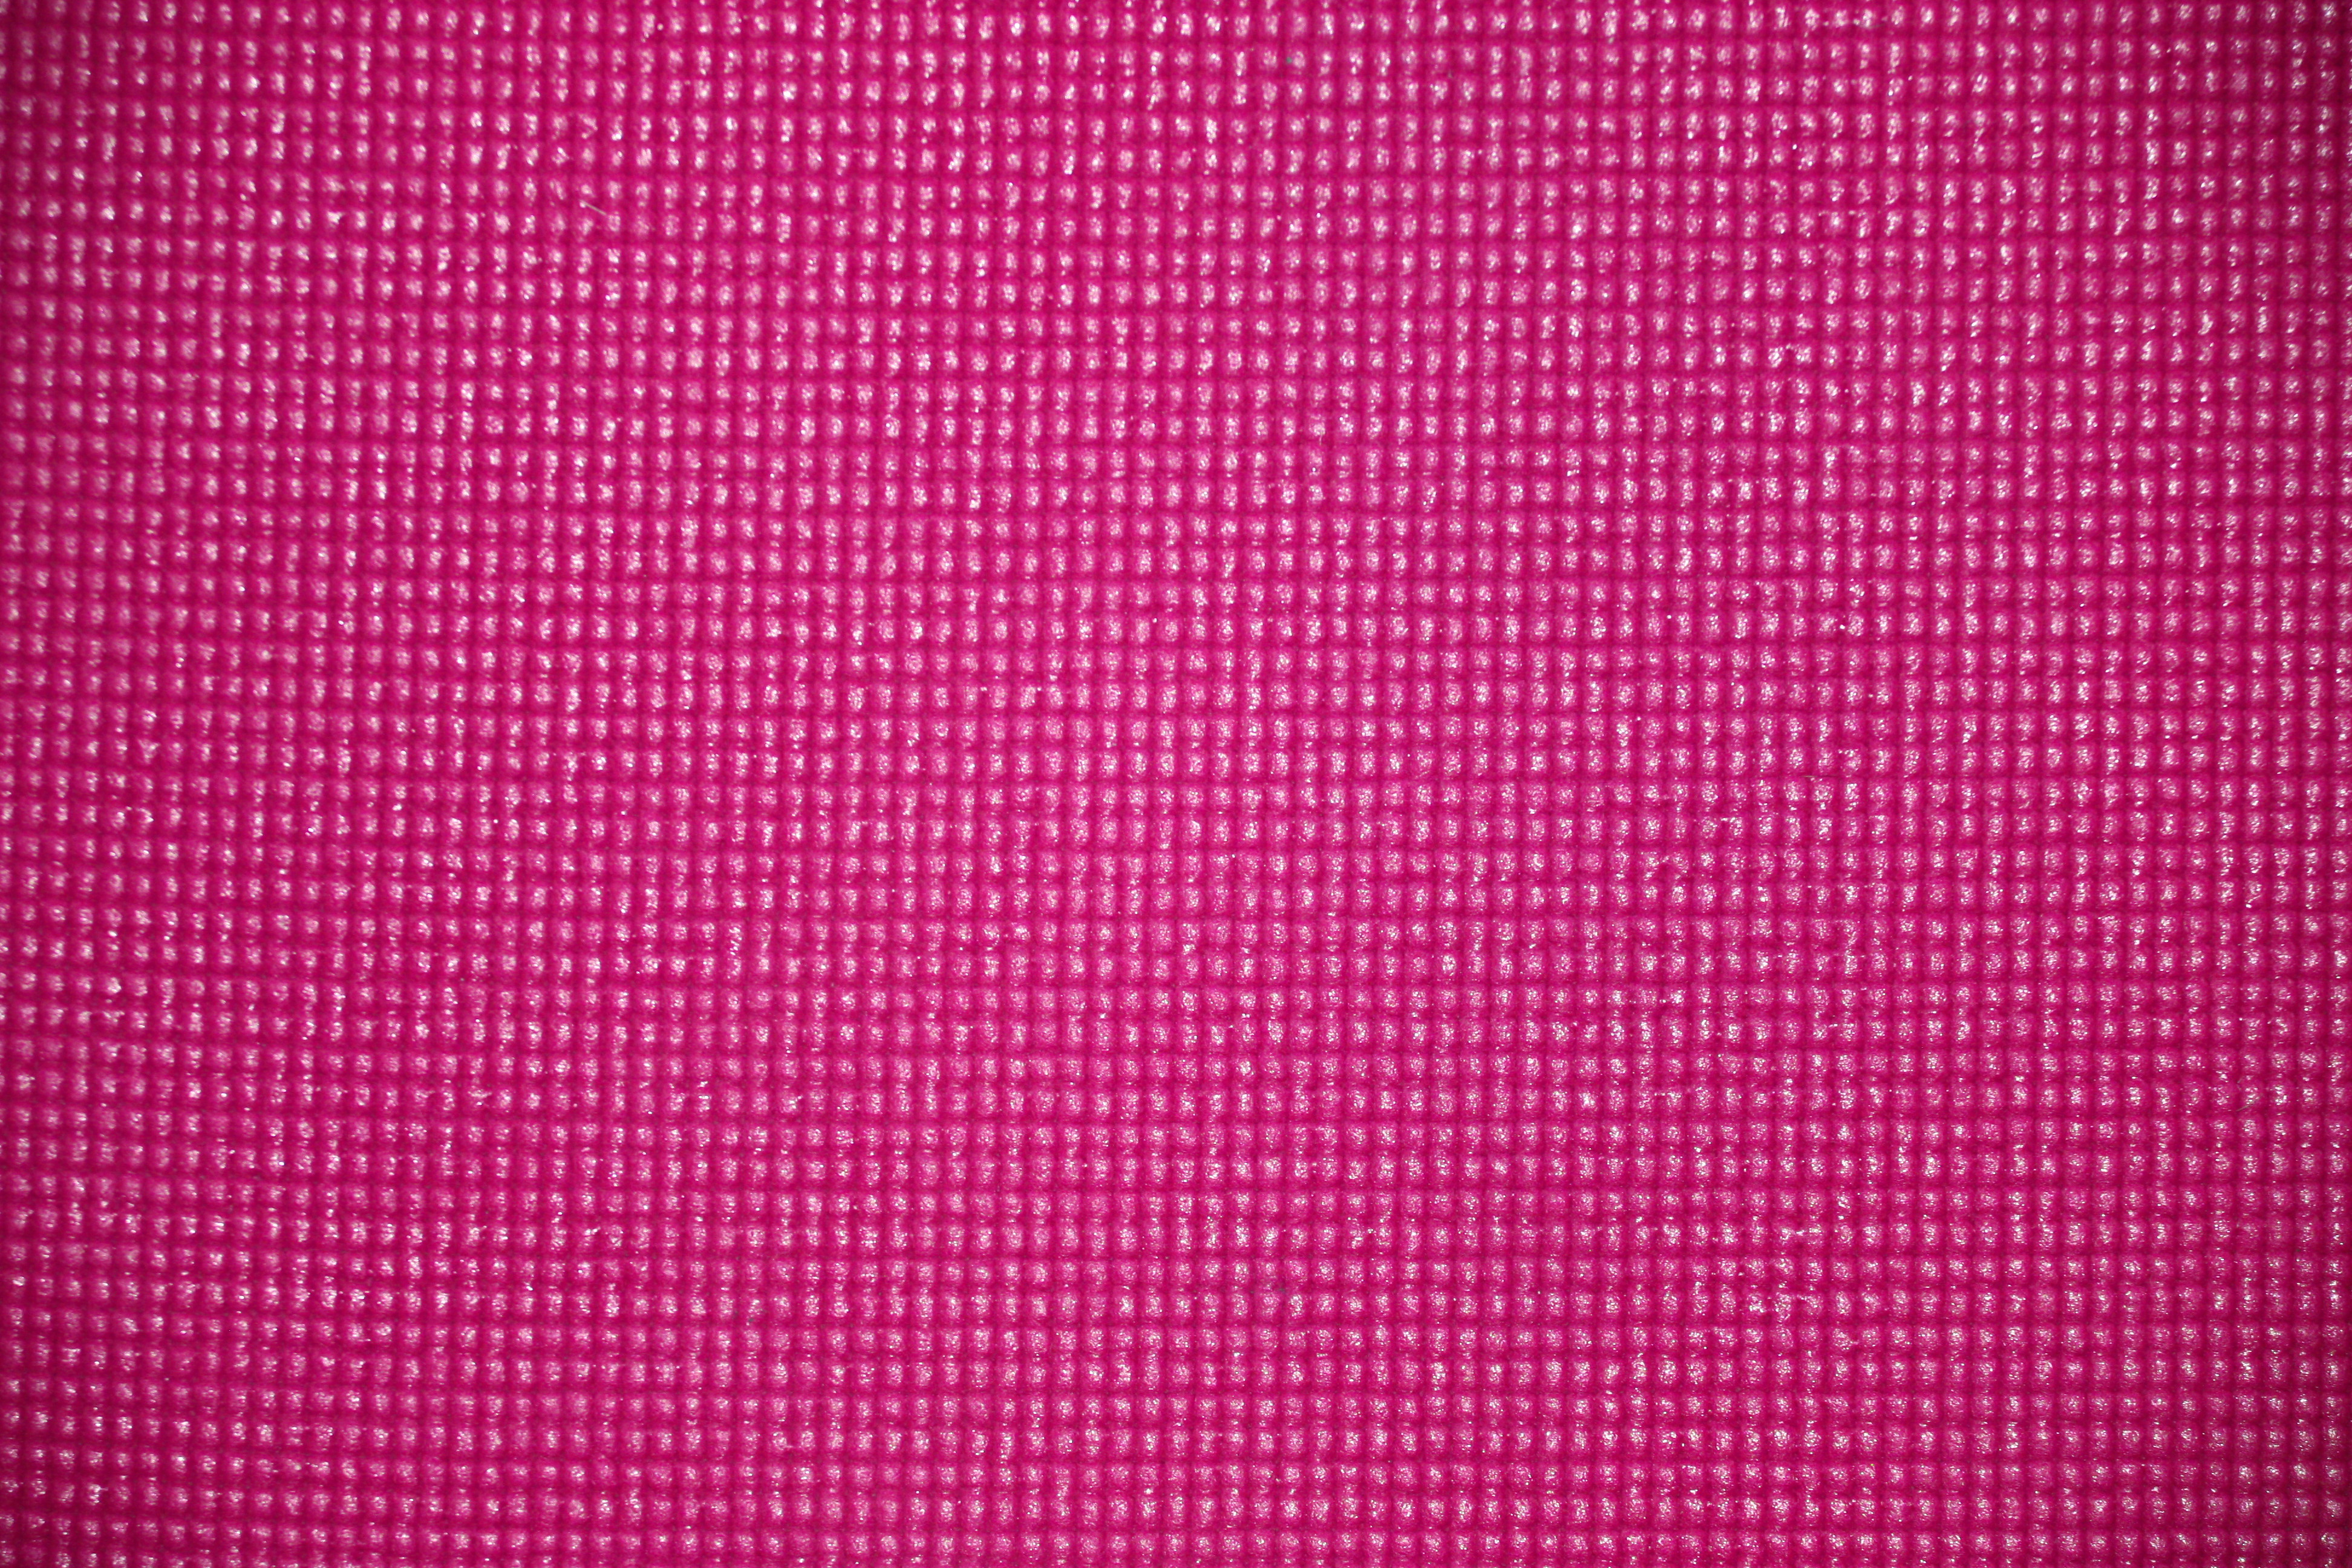 Hot Pink Yoga Exercise Mat Texture Picture | Free Photograph | Photos